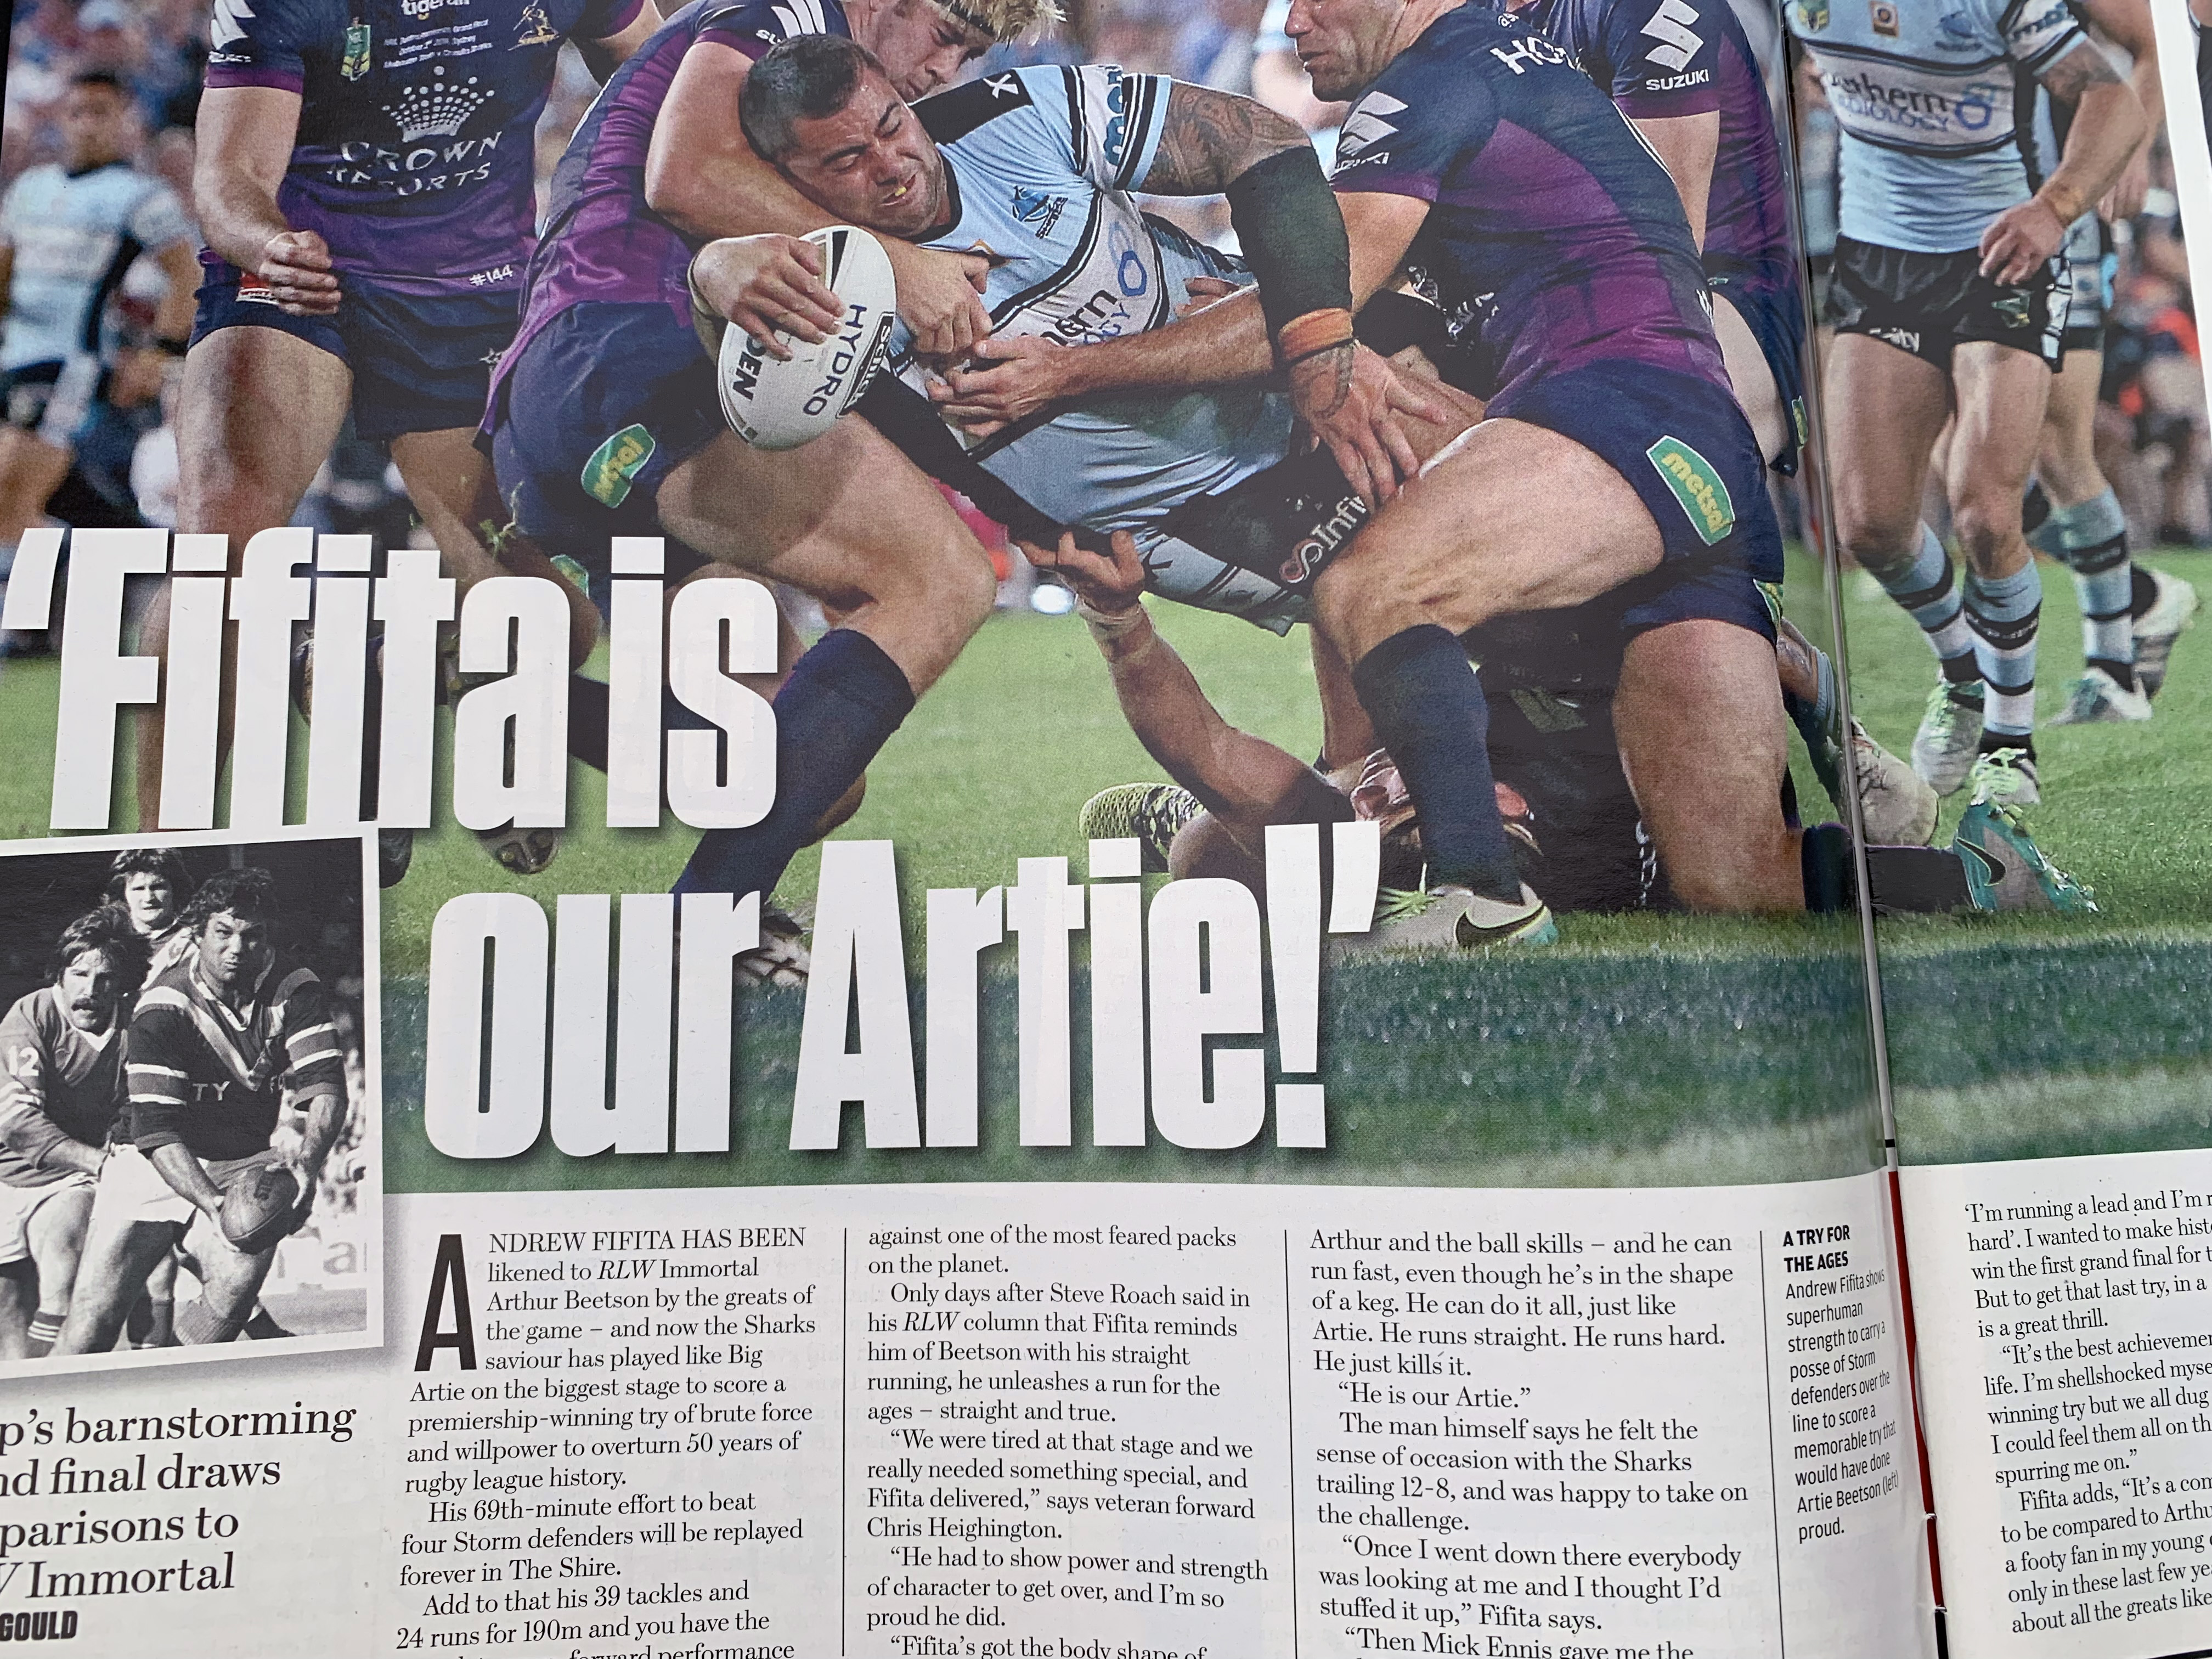 Fifita is our Artie!